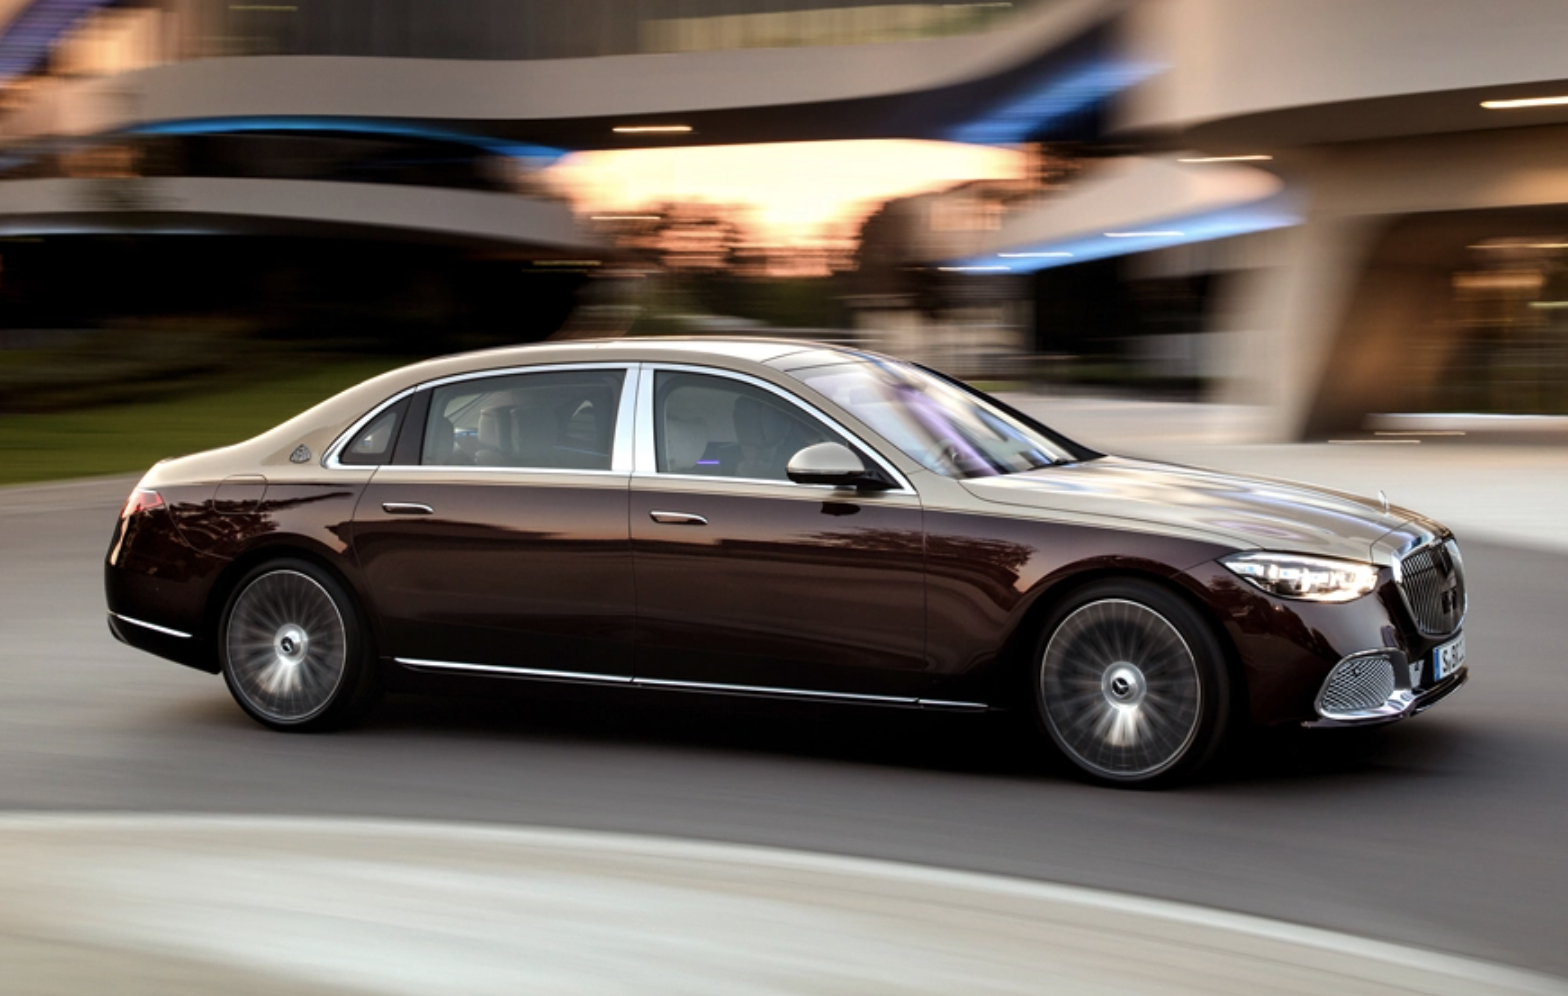 2022 Mercedes-Maybach S 580 Luxury Car Review